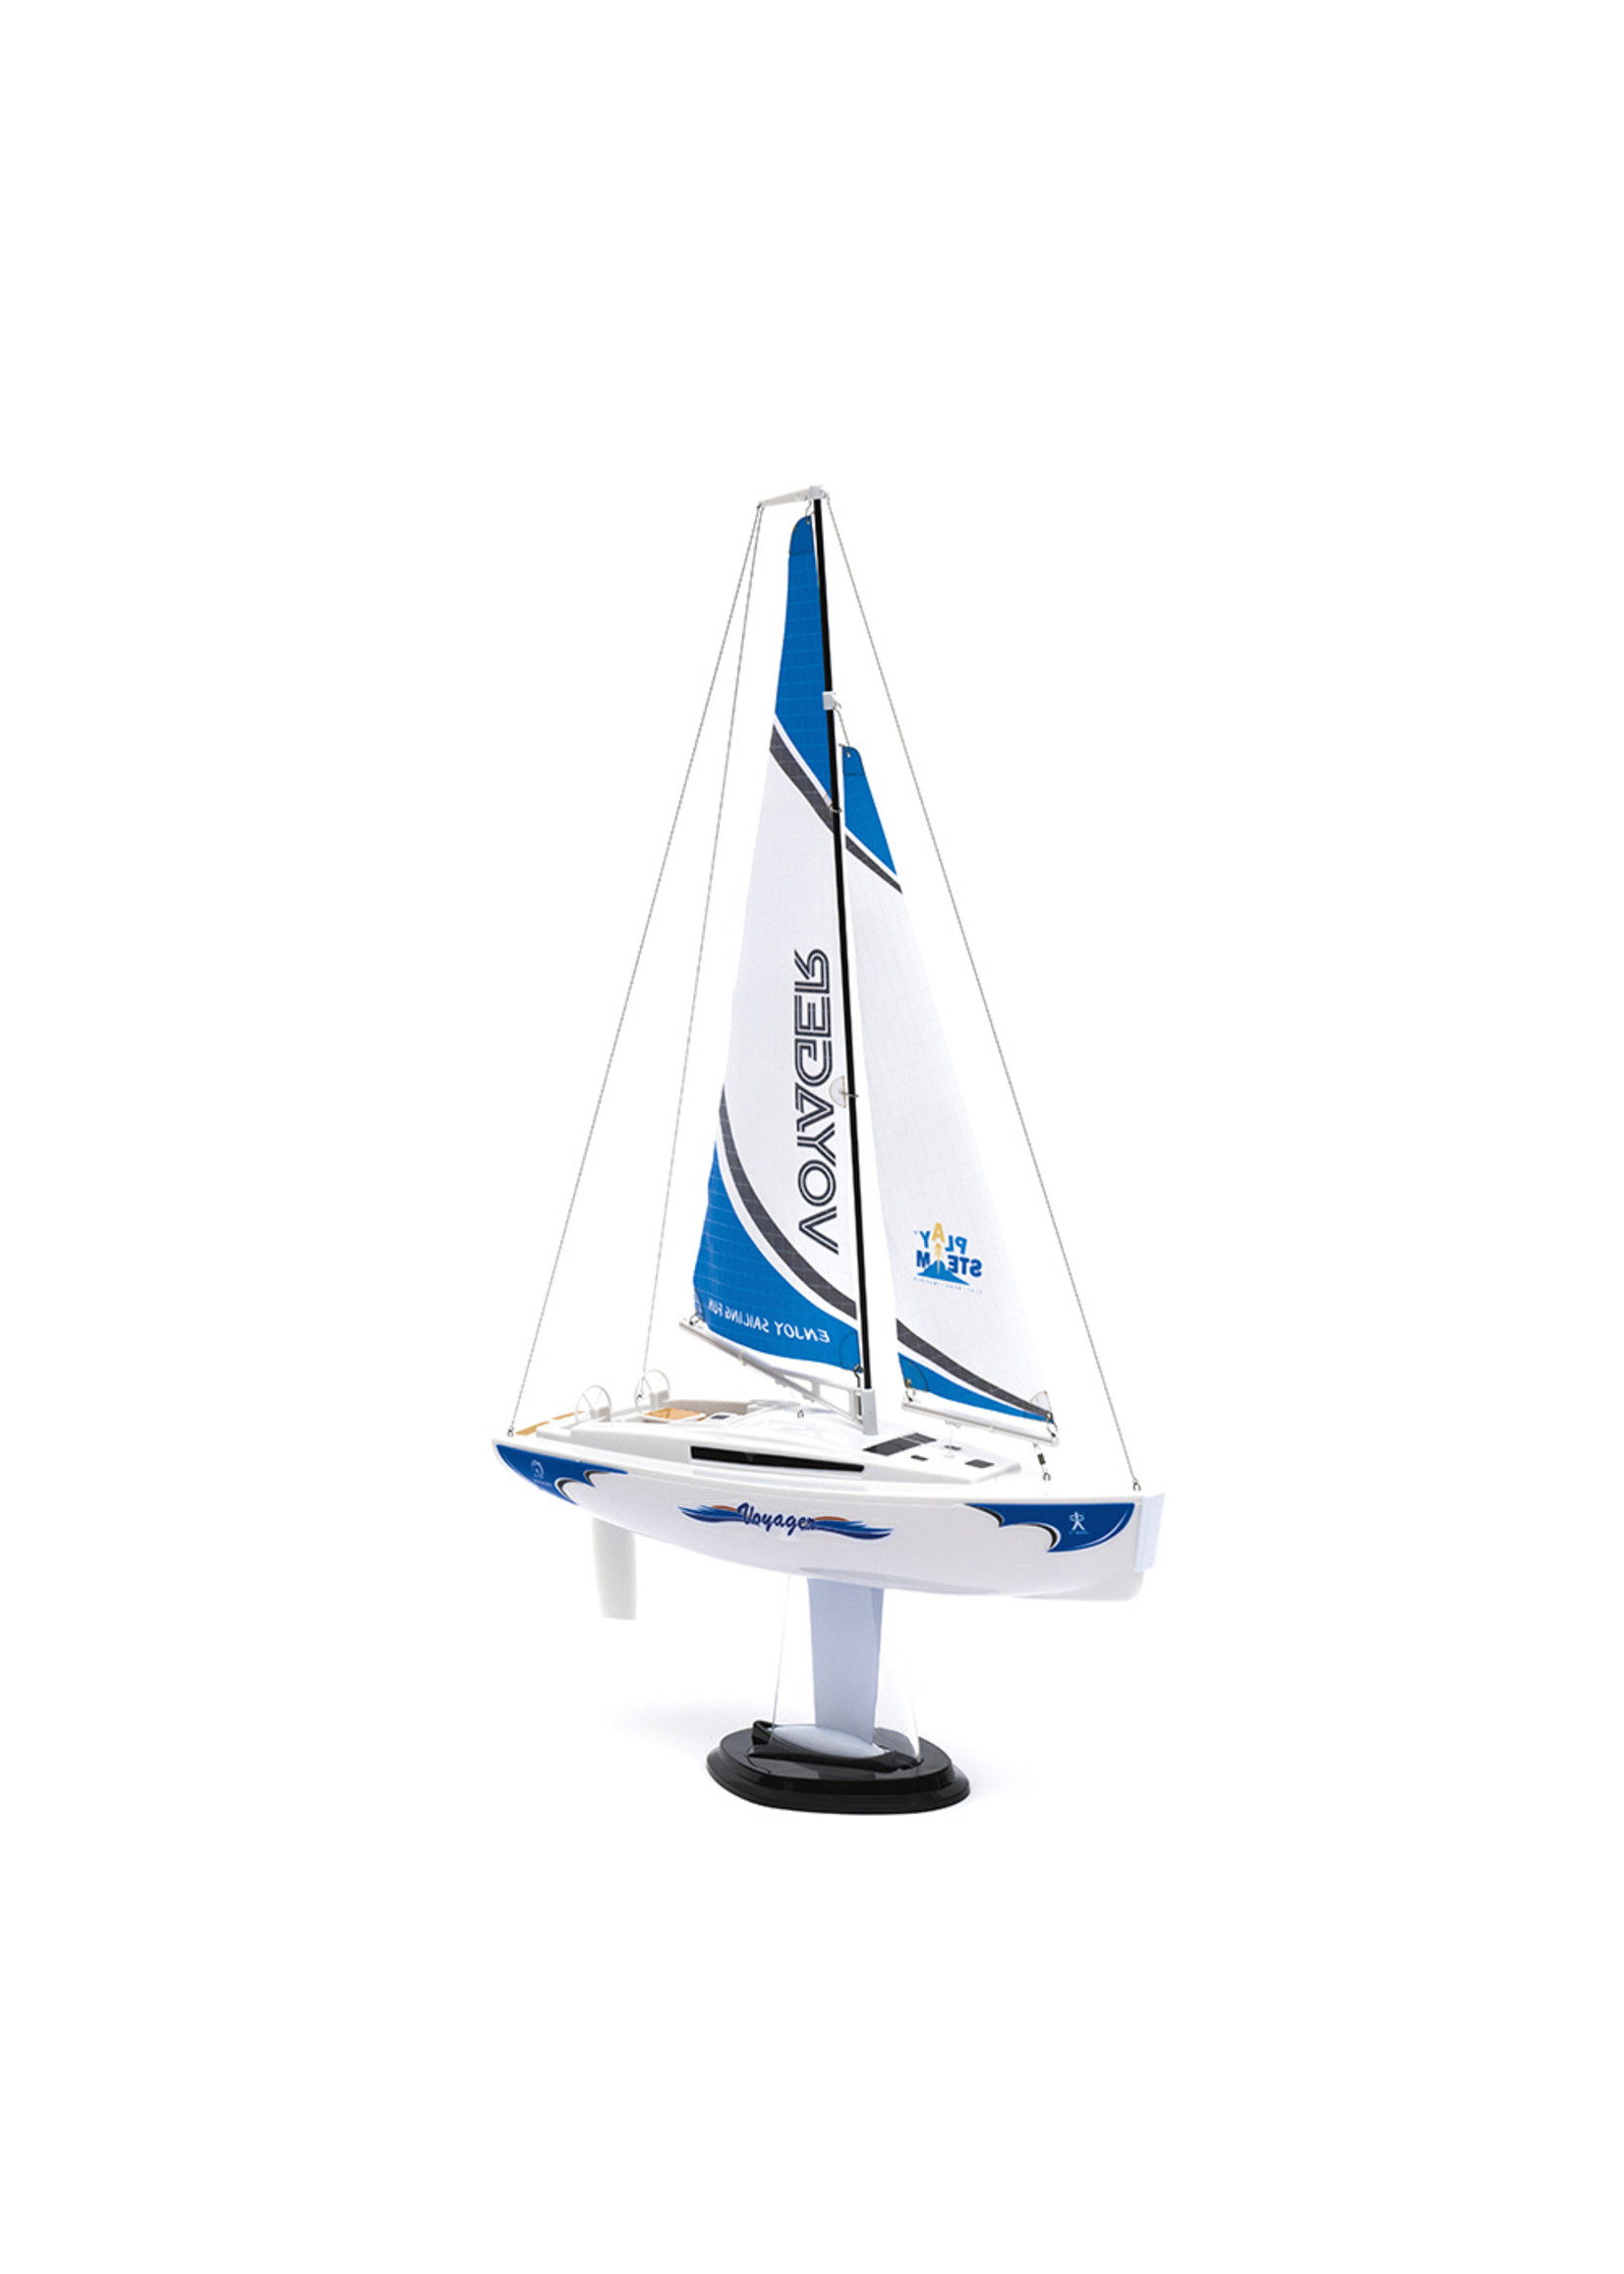 Play Steam Voyager 280 2.4G Sailboat - Blue